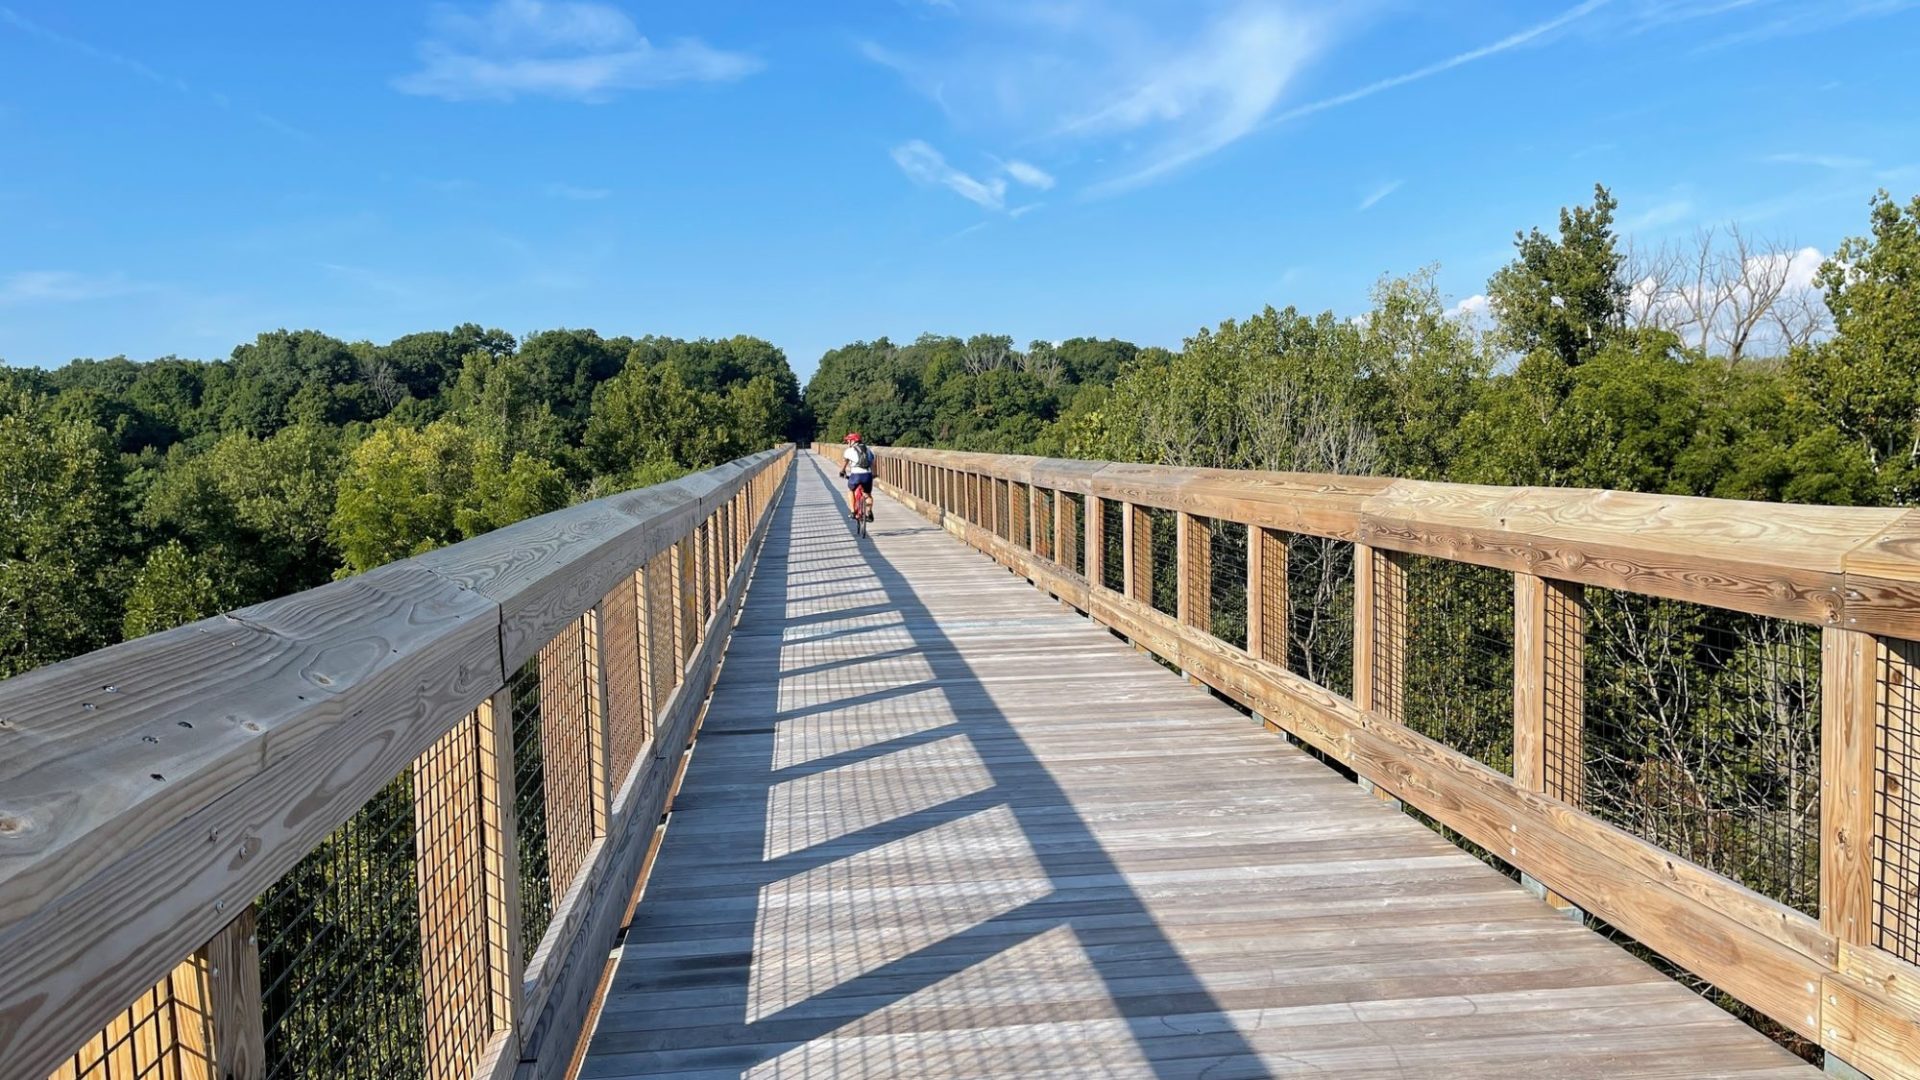 A long wooden bridge stretches to the horizon, where there are green leafy trees. There is a person on a bicycle in the distance.